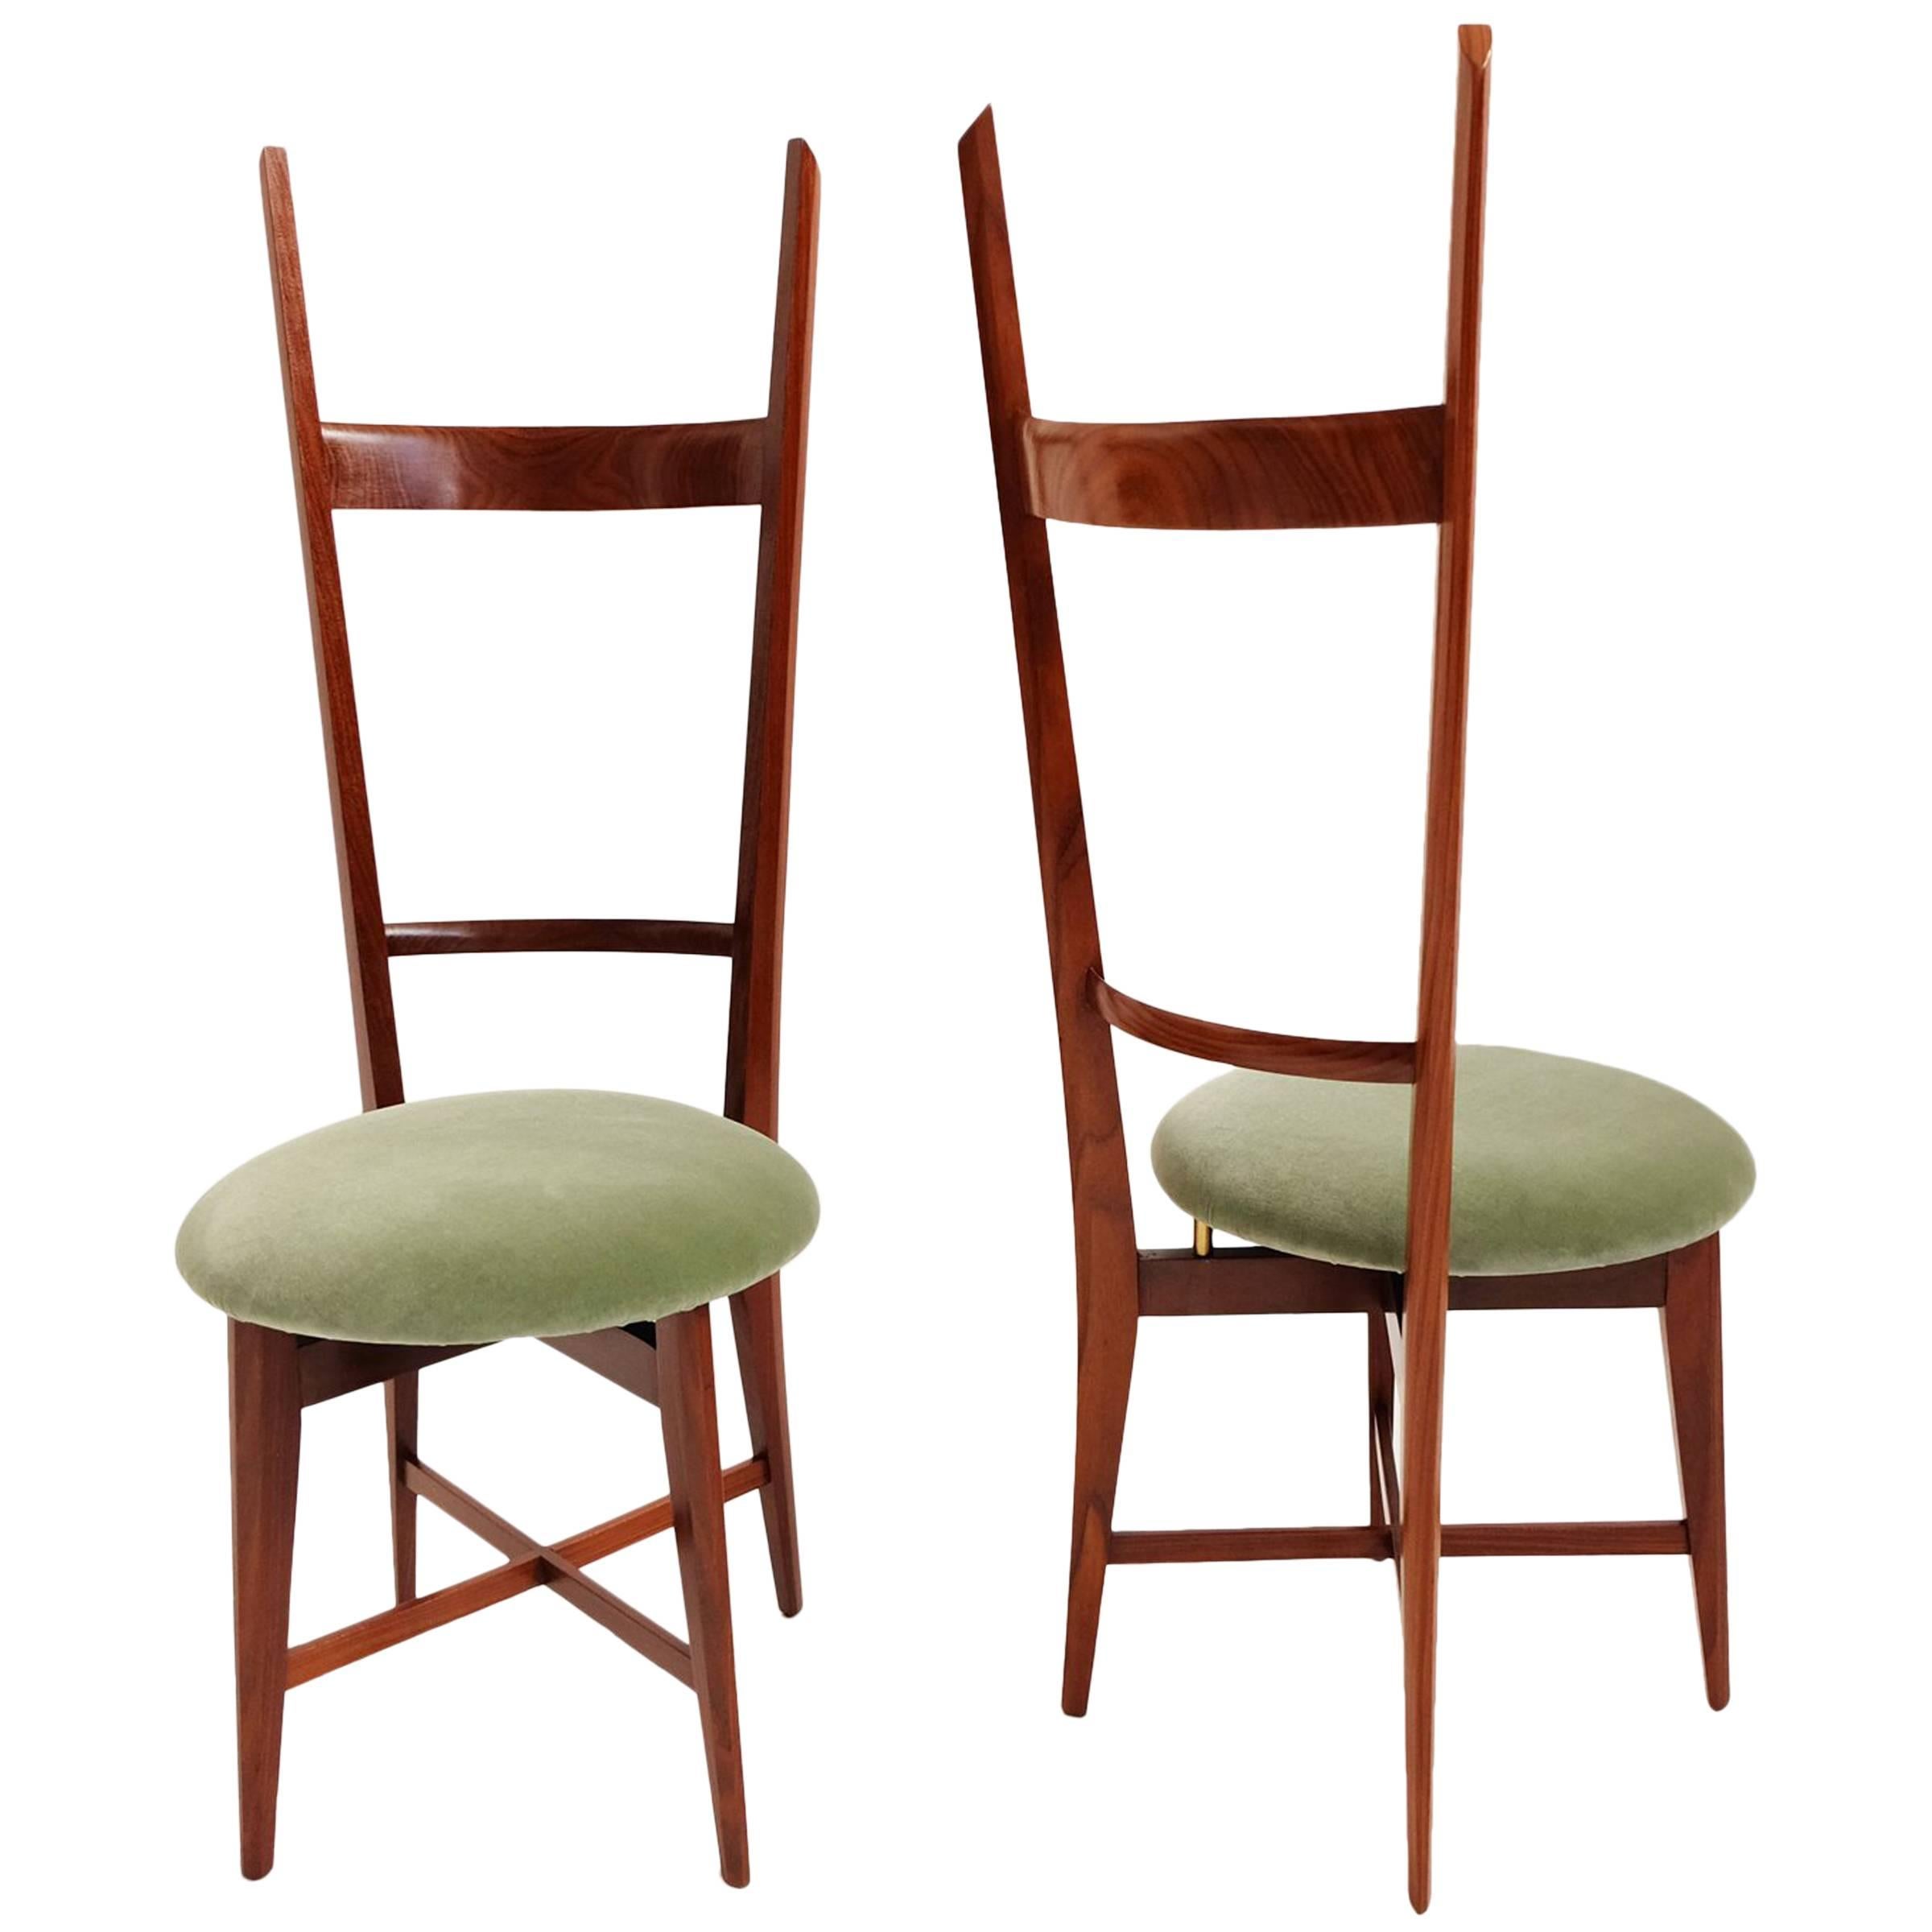 Elegant Pair of Entrance Chairs